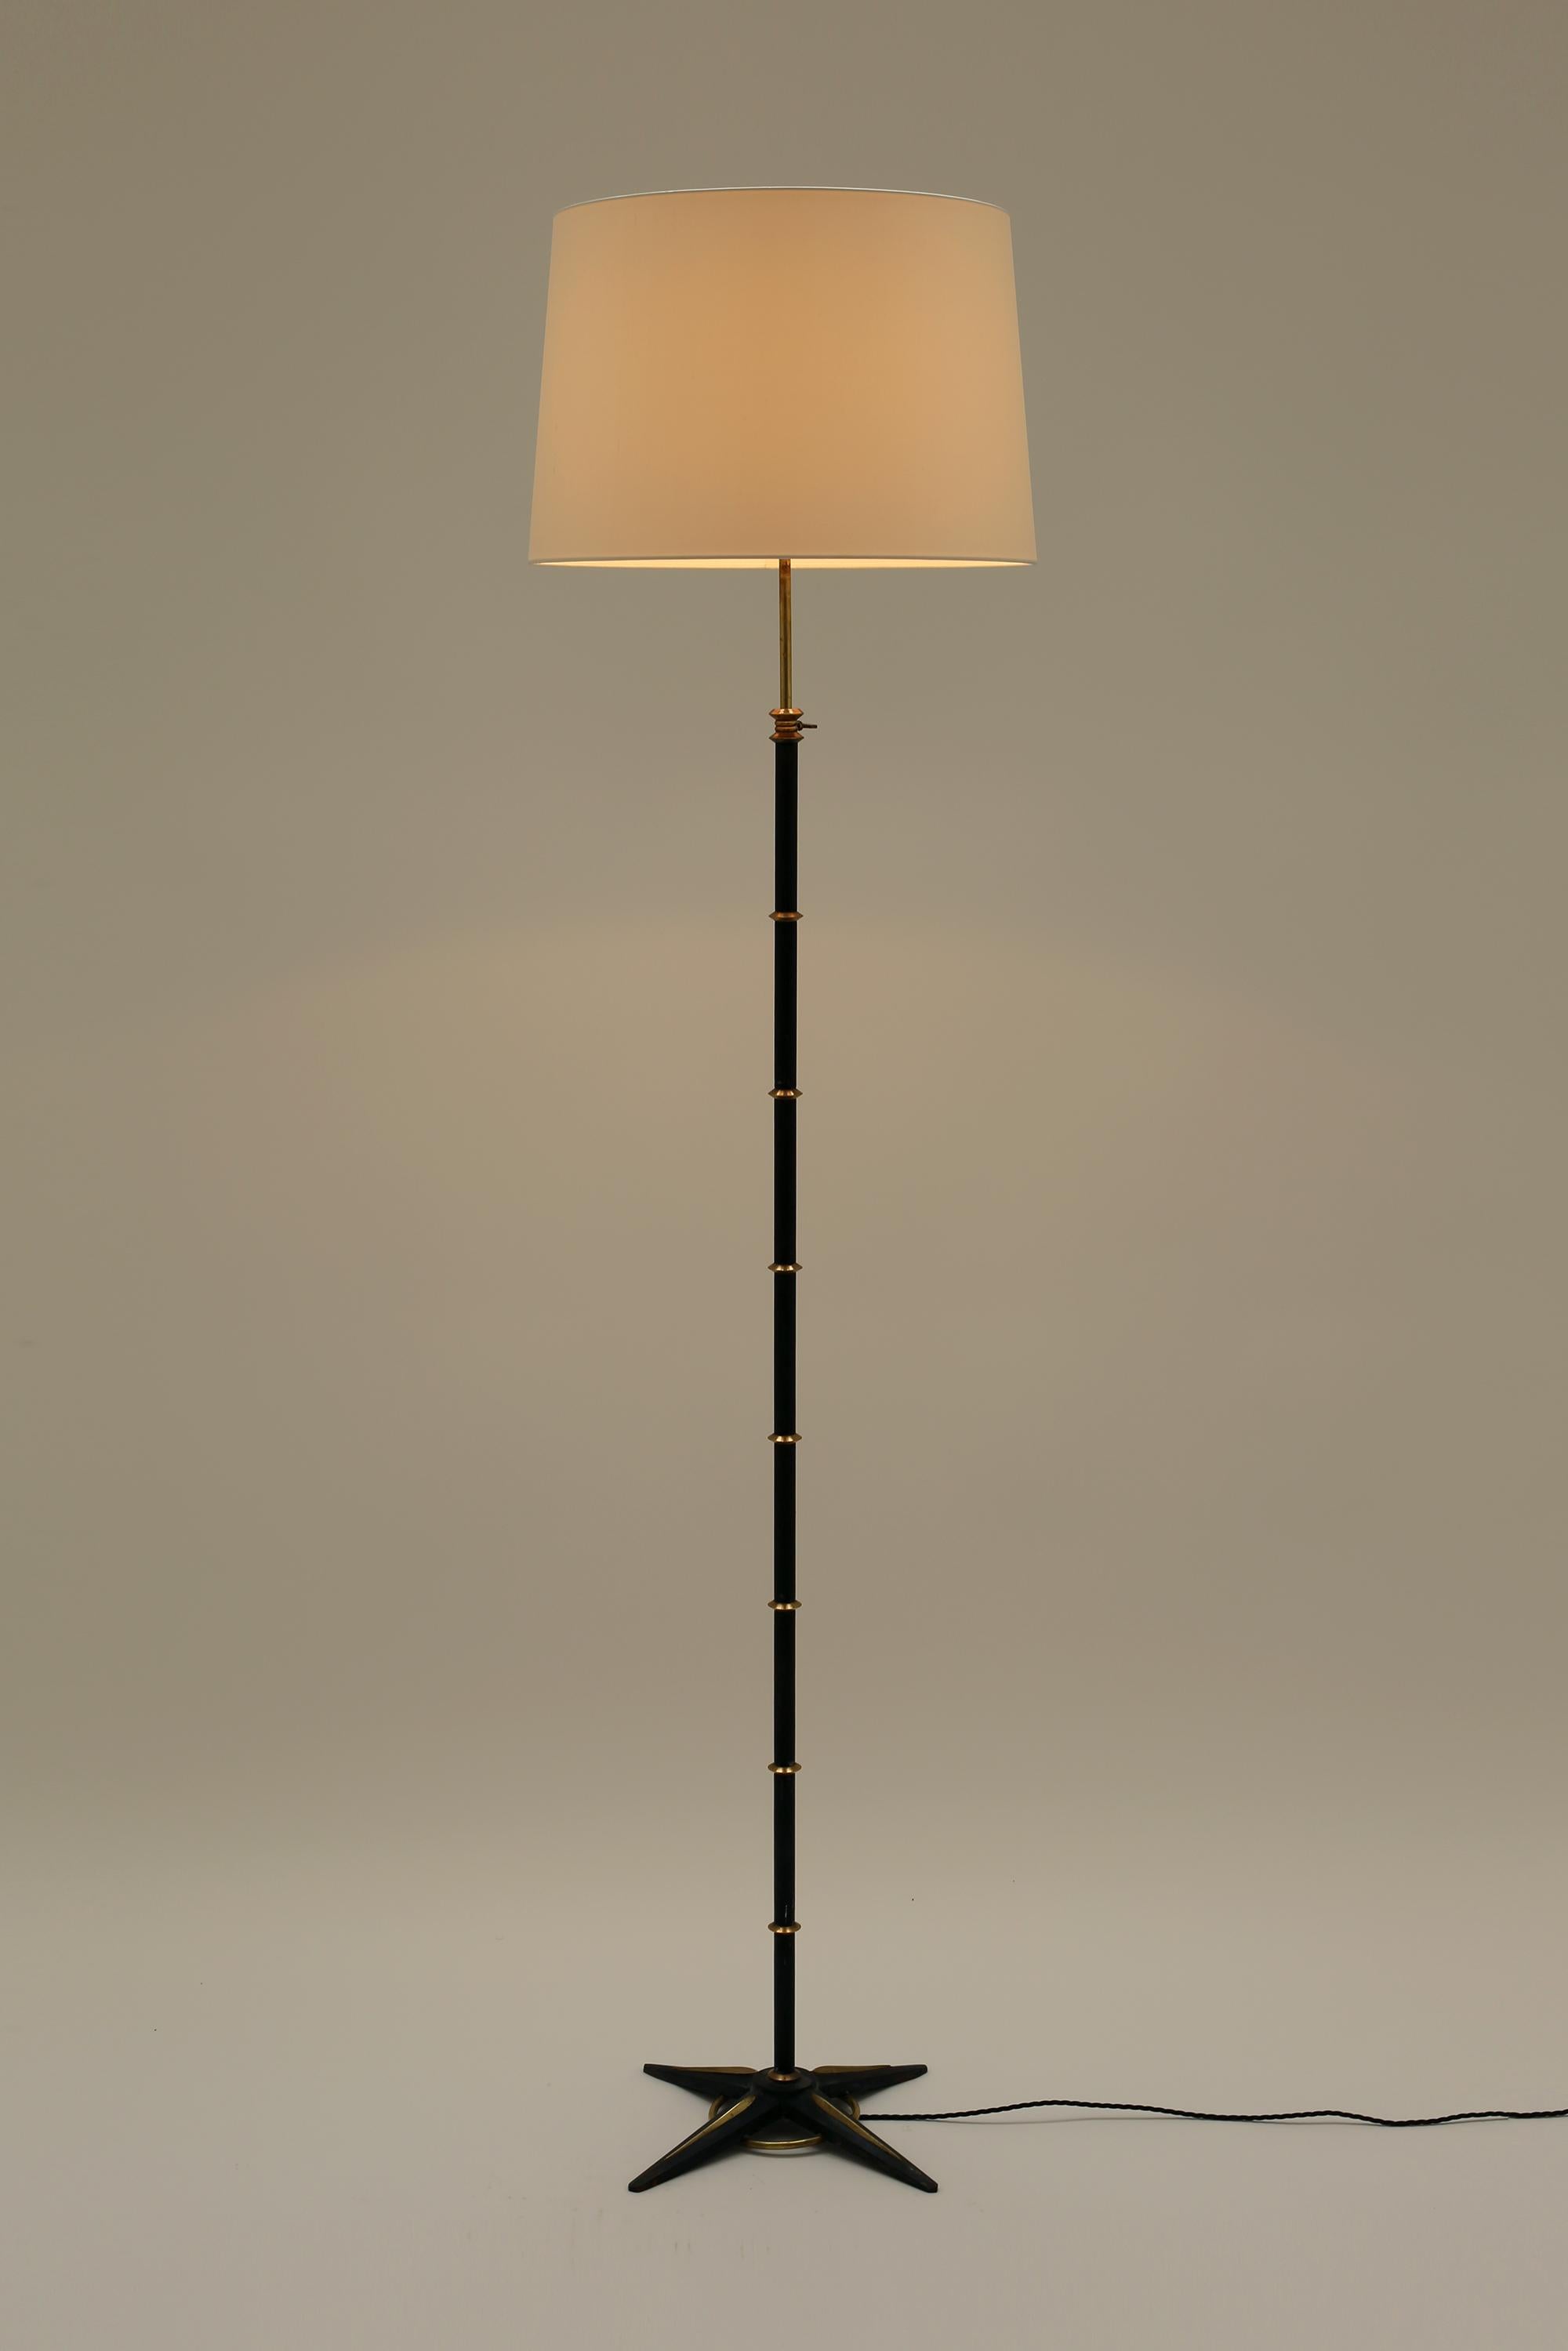 A blackened steel, brass and cast iron adjustable floor lamp by Gilles Sermadiras for Galerie Maison et Jardin. French, c. 1950. Often attributed to Jacques Adnet. Supplied with an off-white dupion silk Empire shade.